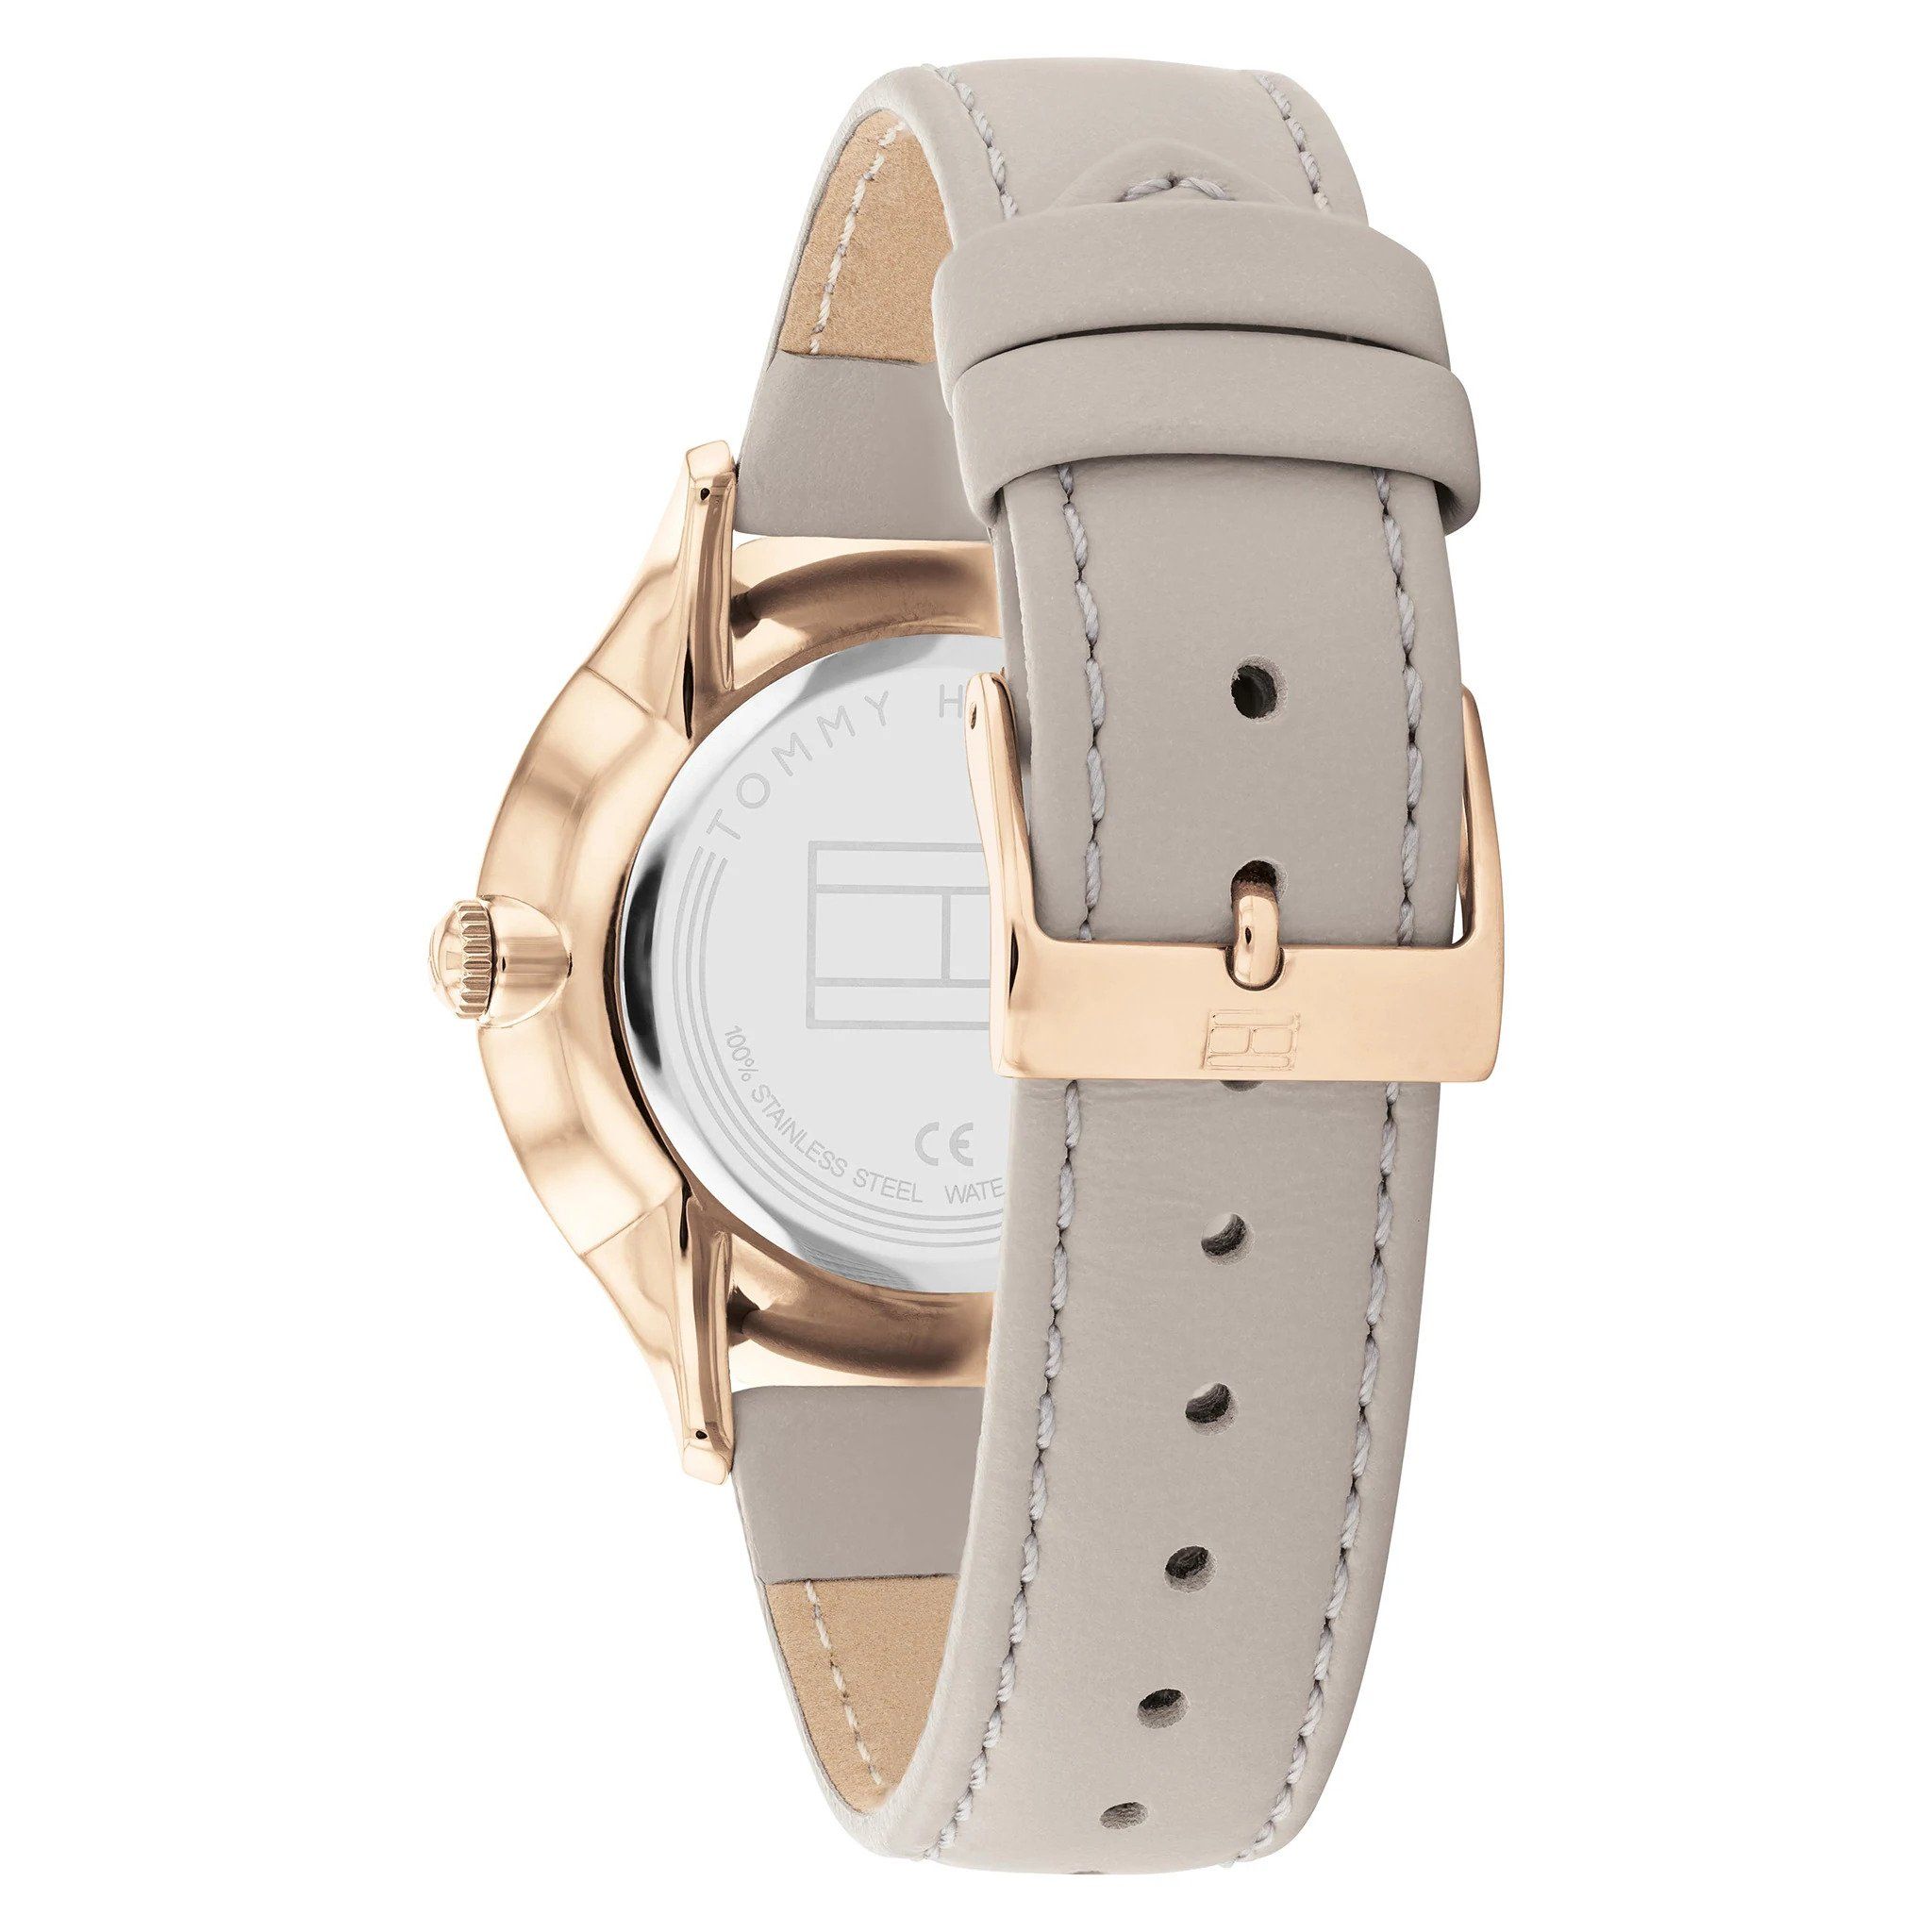 This Tommy Hilfiger Layla Multi Dial Watch for Women is the perfect timepiece to wear or to gift. It's Rose gold 38 mm Round case combined with the comfortable Grey Leather watch band will ensure you enjoy this stunning timepiece without any compromise. Operated by a high quality Quartz movement and water resistant to 3 bars, your watch will keep ticking. This classic watch gives a comfortable feeling with its leather strap, it's perfect for every occasion -The watch has a calendar function: Day-Date, 24-hour Display High quality 19 cm length and 17 mm width Grey Leather strap with a Buckle Case diameter: 38 mm,case thickness: 10 mm, case colour: Rose Gold and dial colour: White